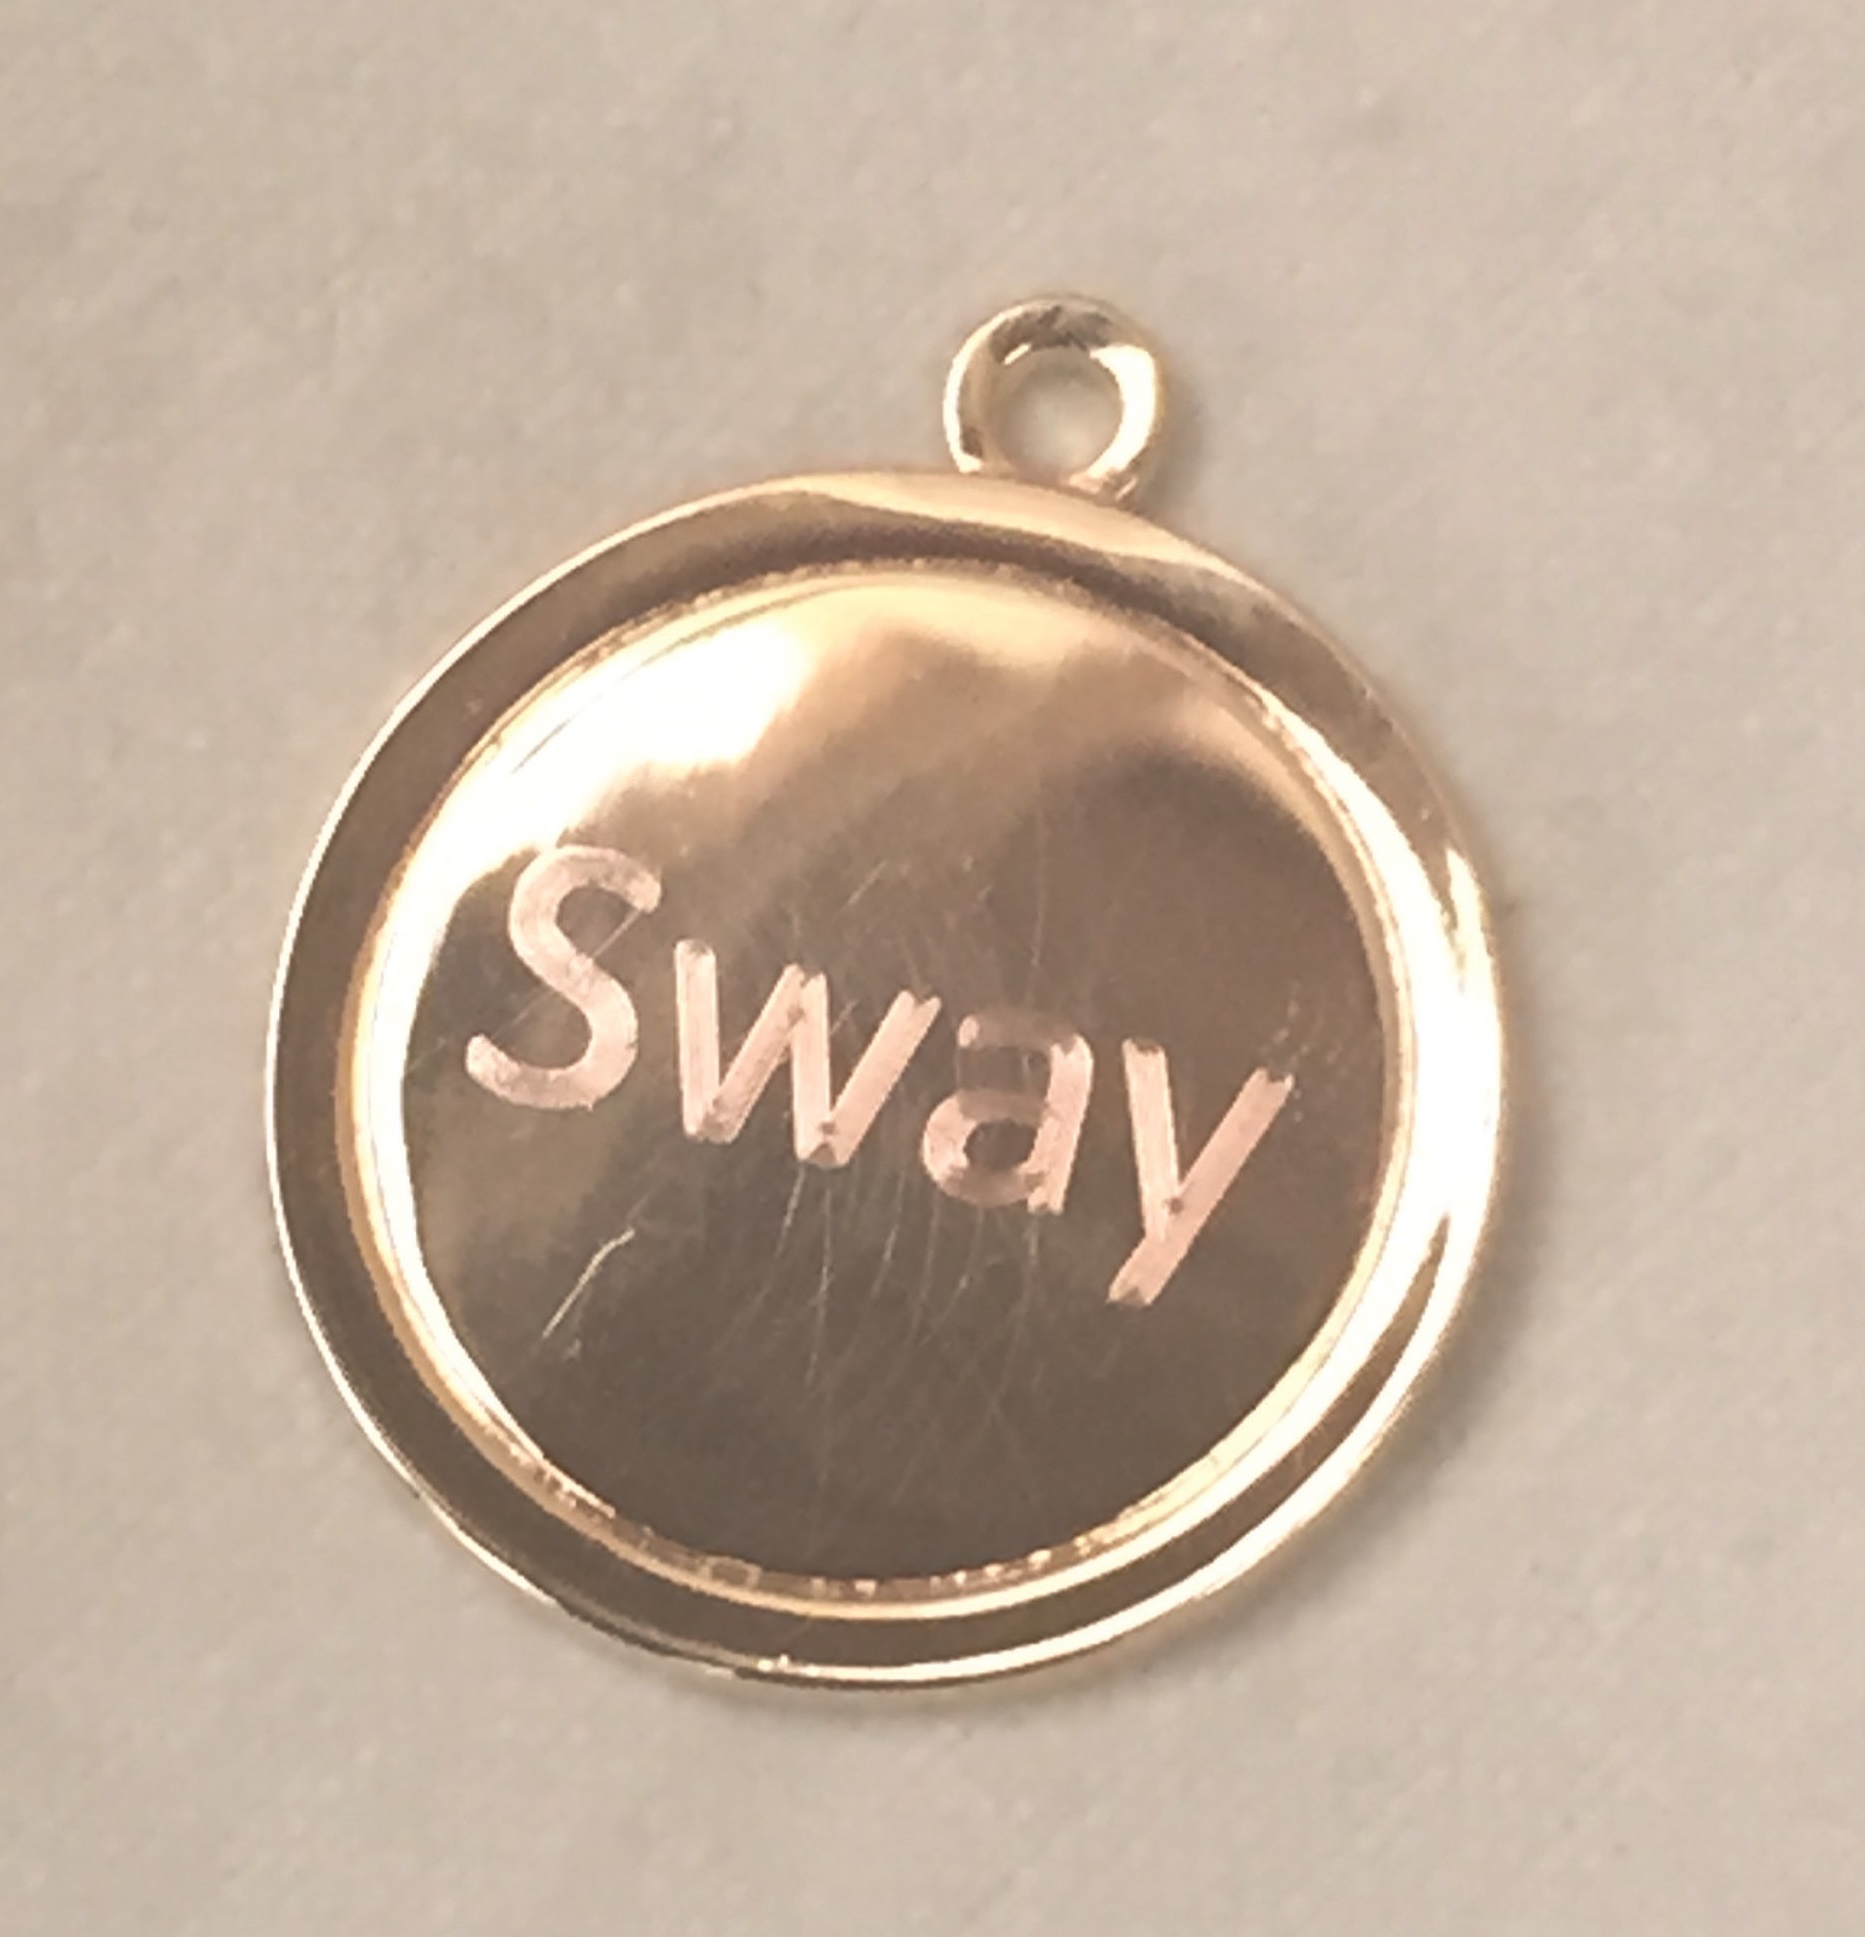 Finished Swag Tag - Image